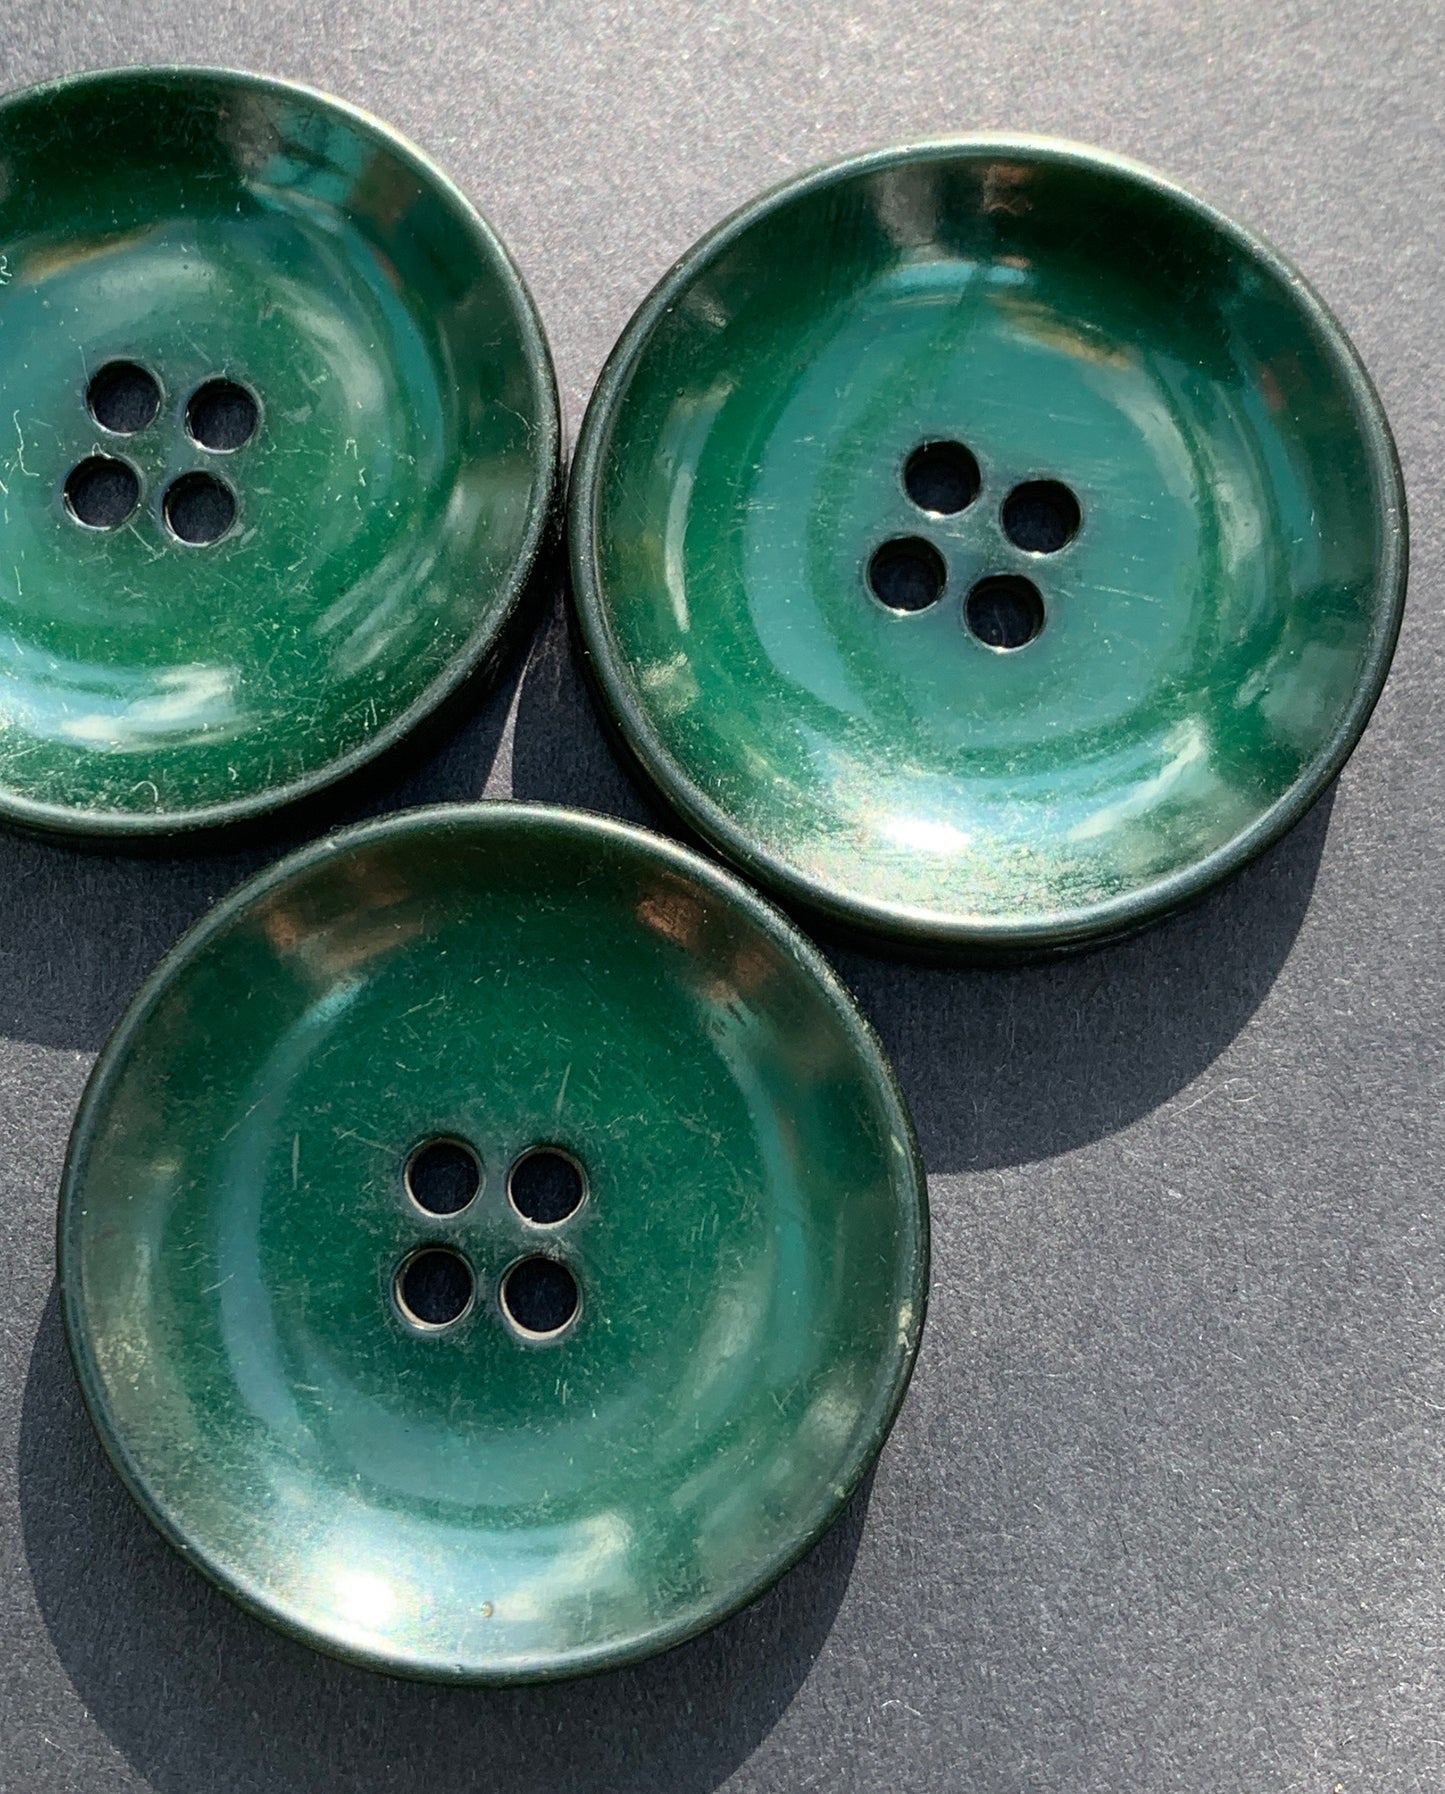 One Big 3.4cm Racing Green Vintage Buttons